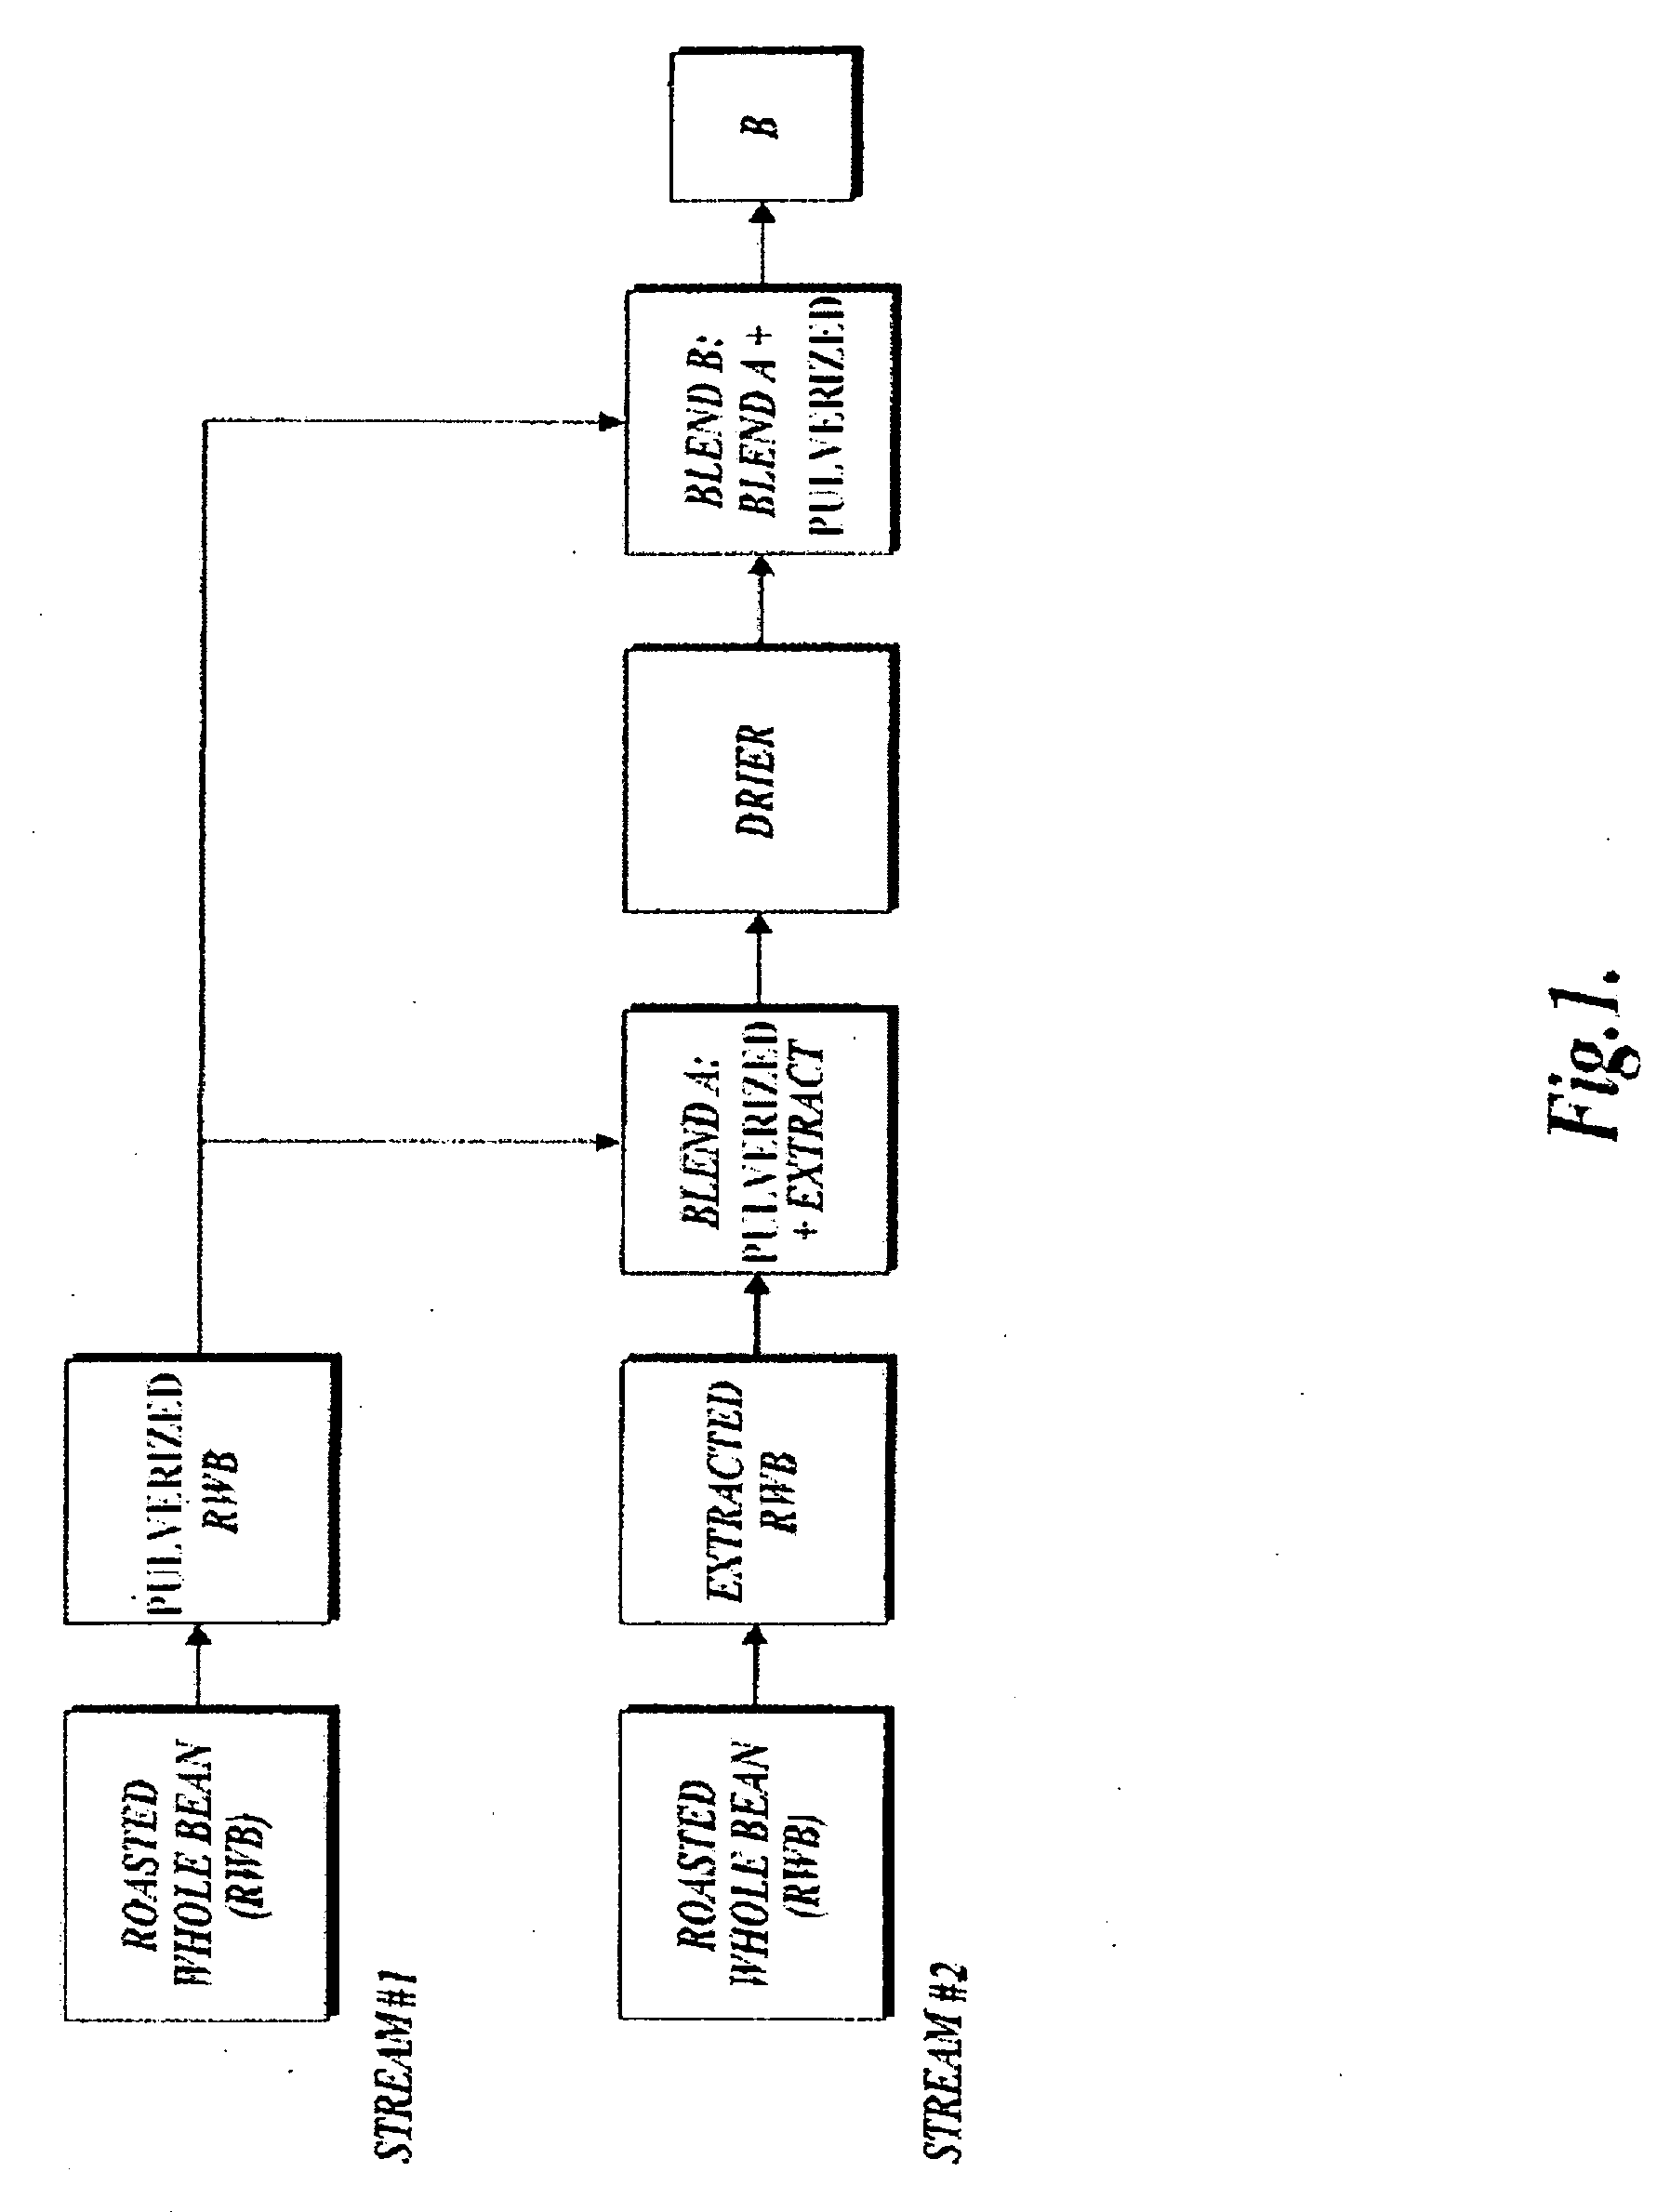 Beverages with enhanced flavors and aromas and method of making same